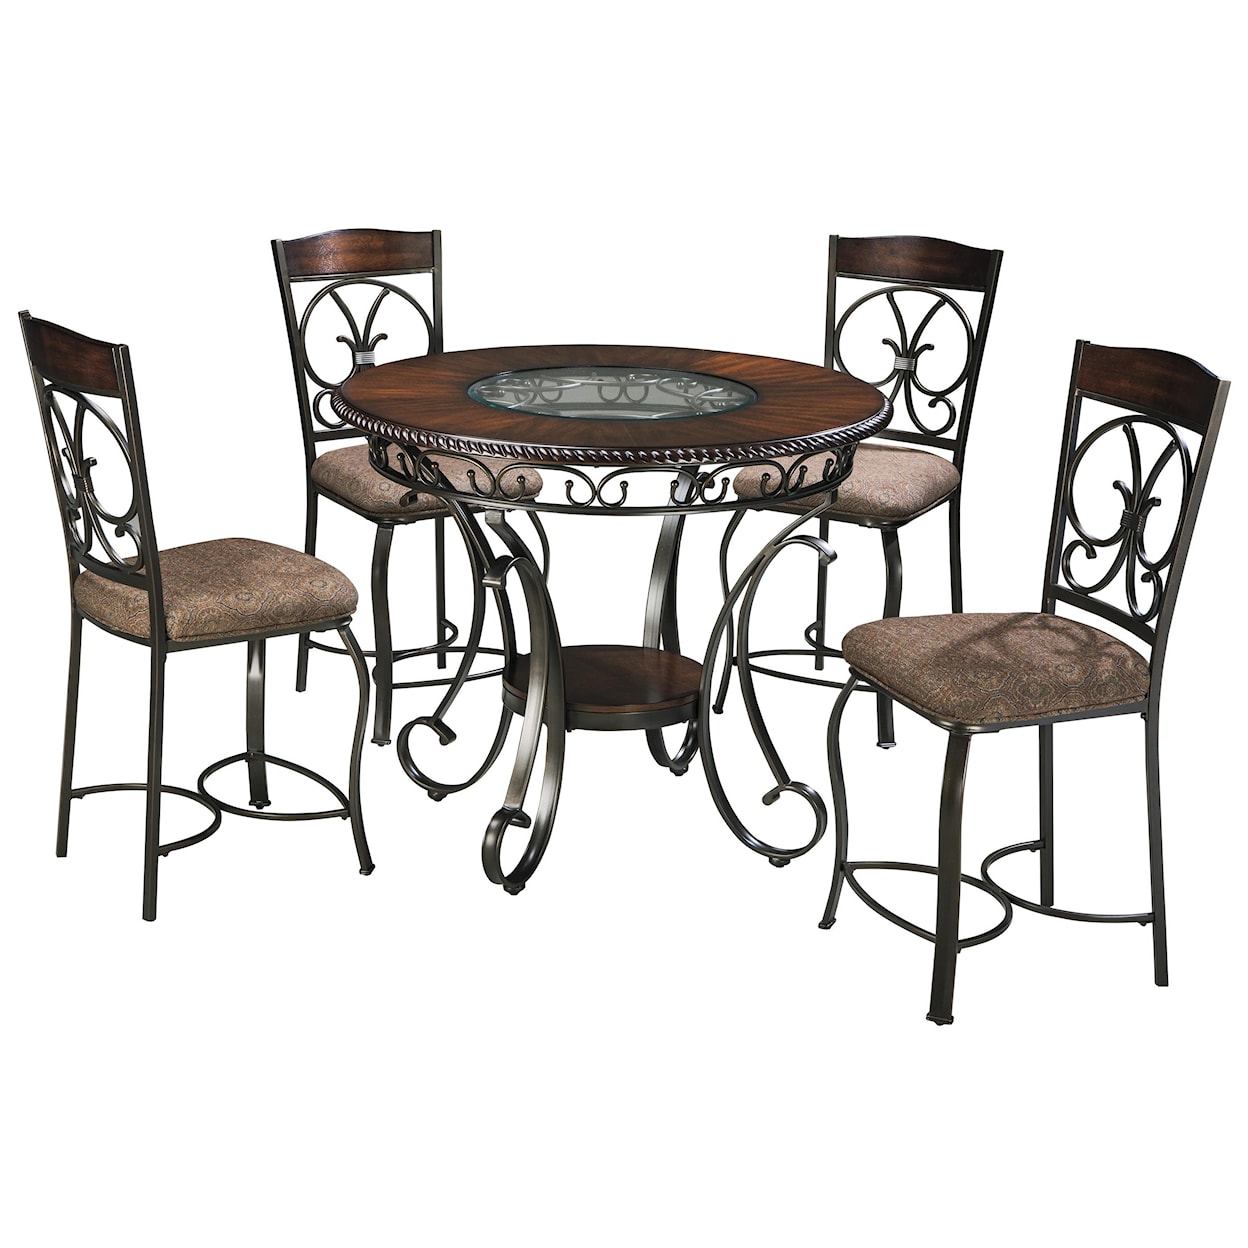 Signature Design by Ashley Glambrey 5 Pc Dining Group